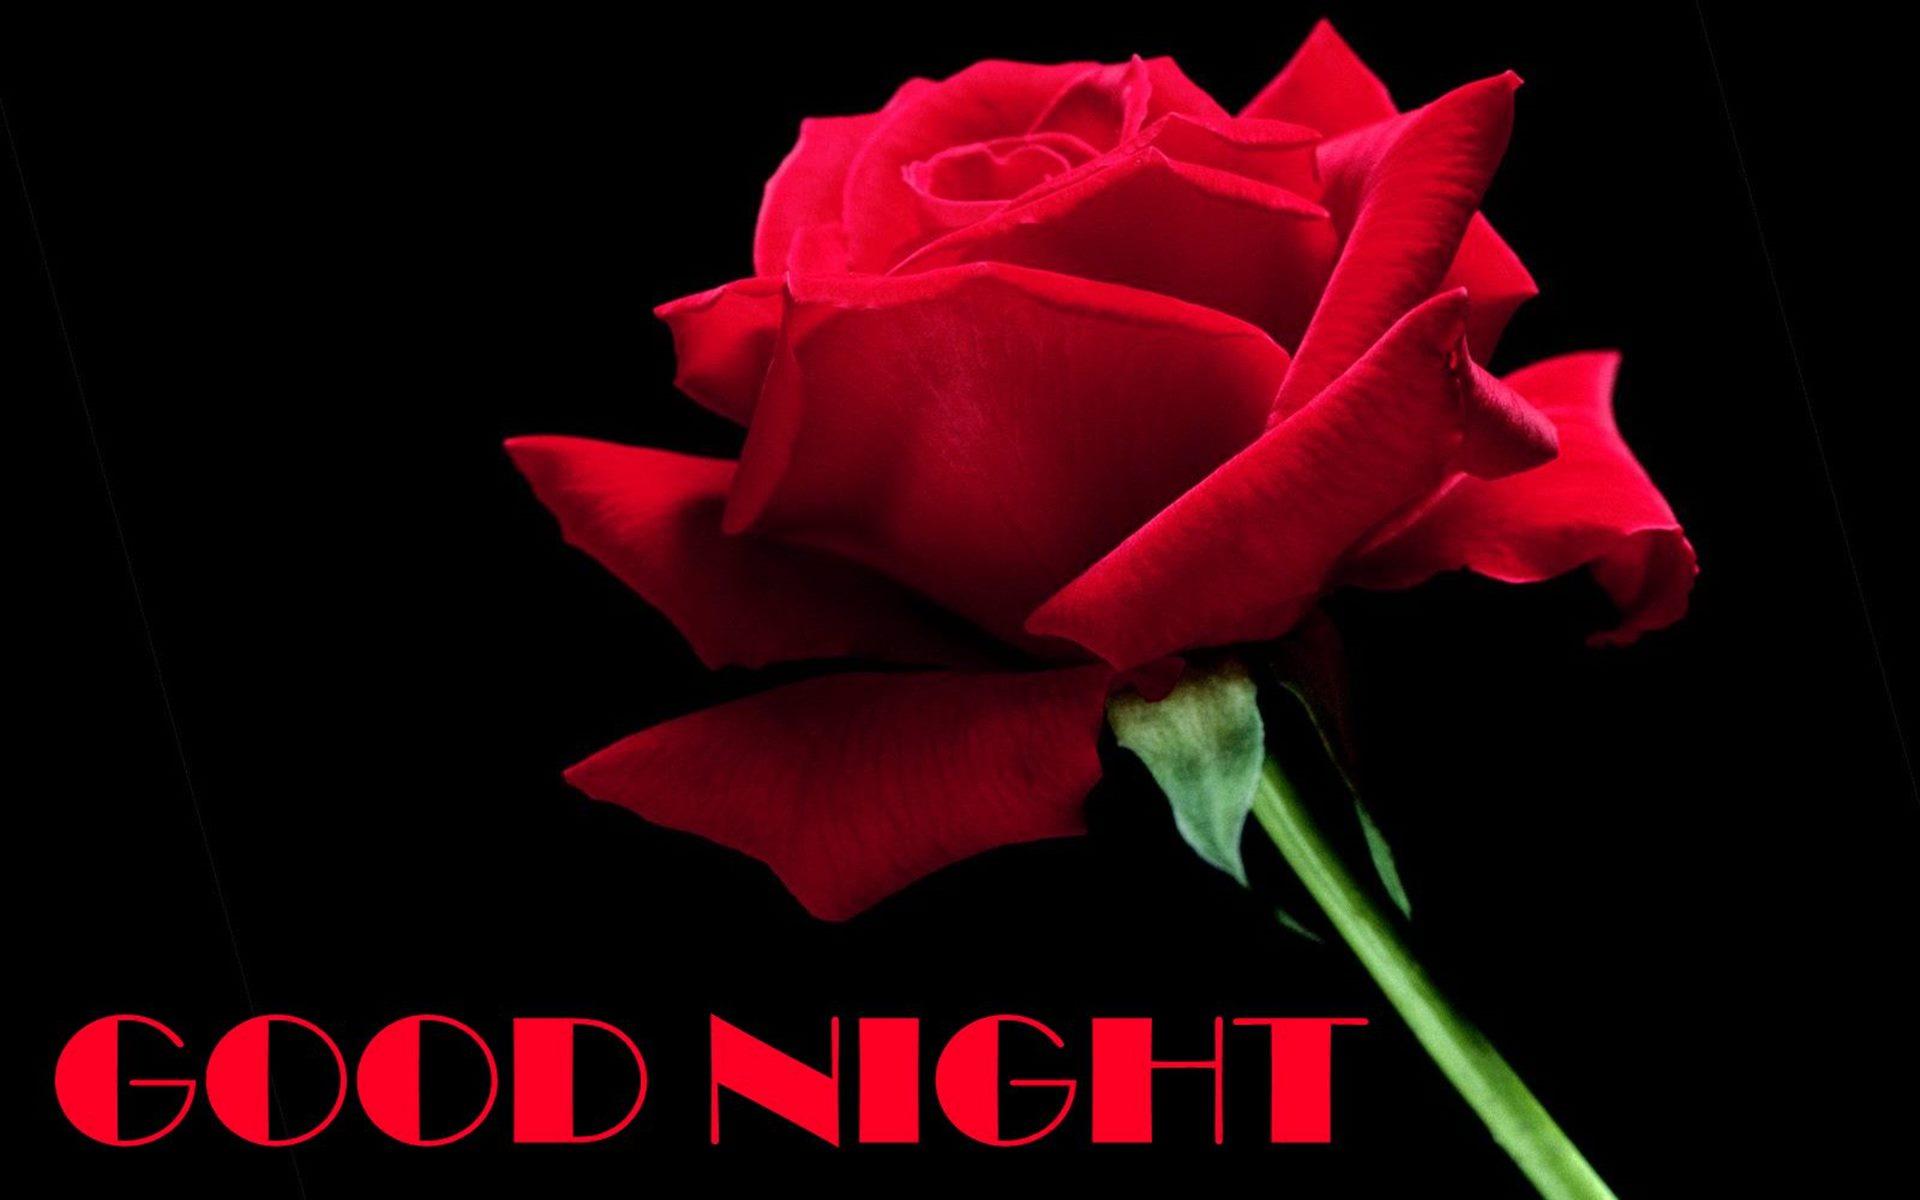 Good Night Rose Wallpaper Download, image collections